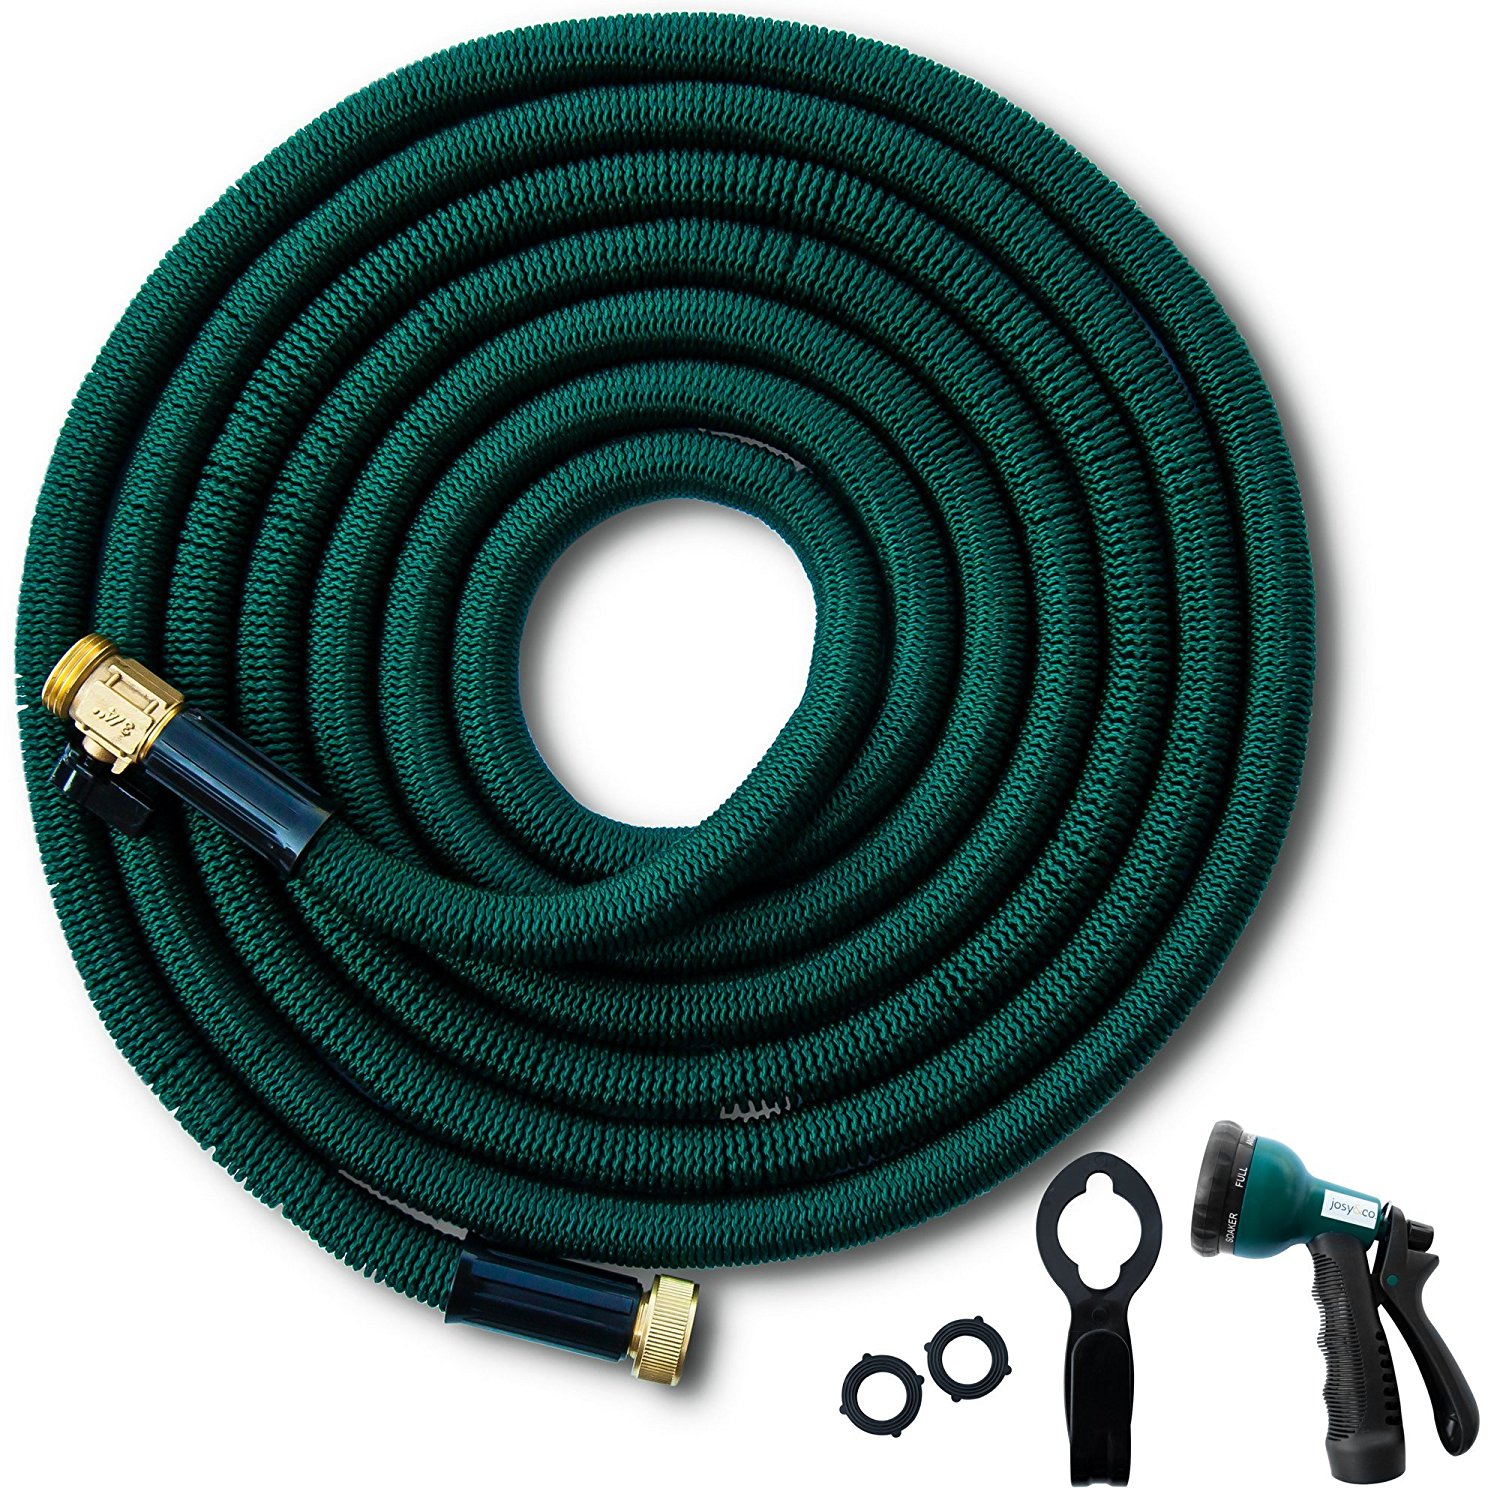 Josy&co. 50 ft Expandable Garden Hose. Triple Latex Layers. Flexible, Kink-Free, Brass Fittings, Steel Assembly Clamps. Expanding Water Hose Includes 8-Pattern Spray Nozzle & Hanger. 12 Month Warranty